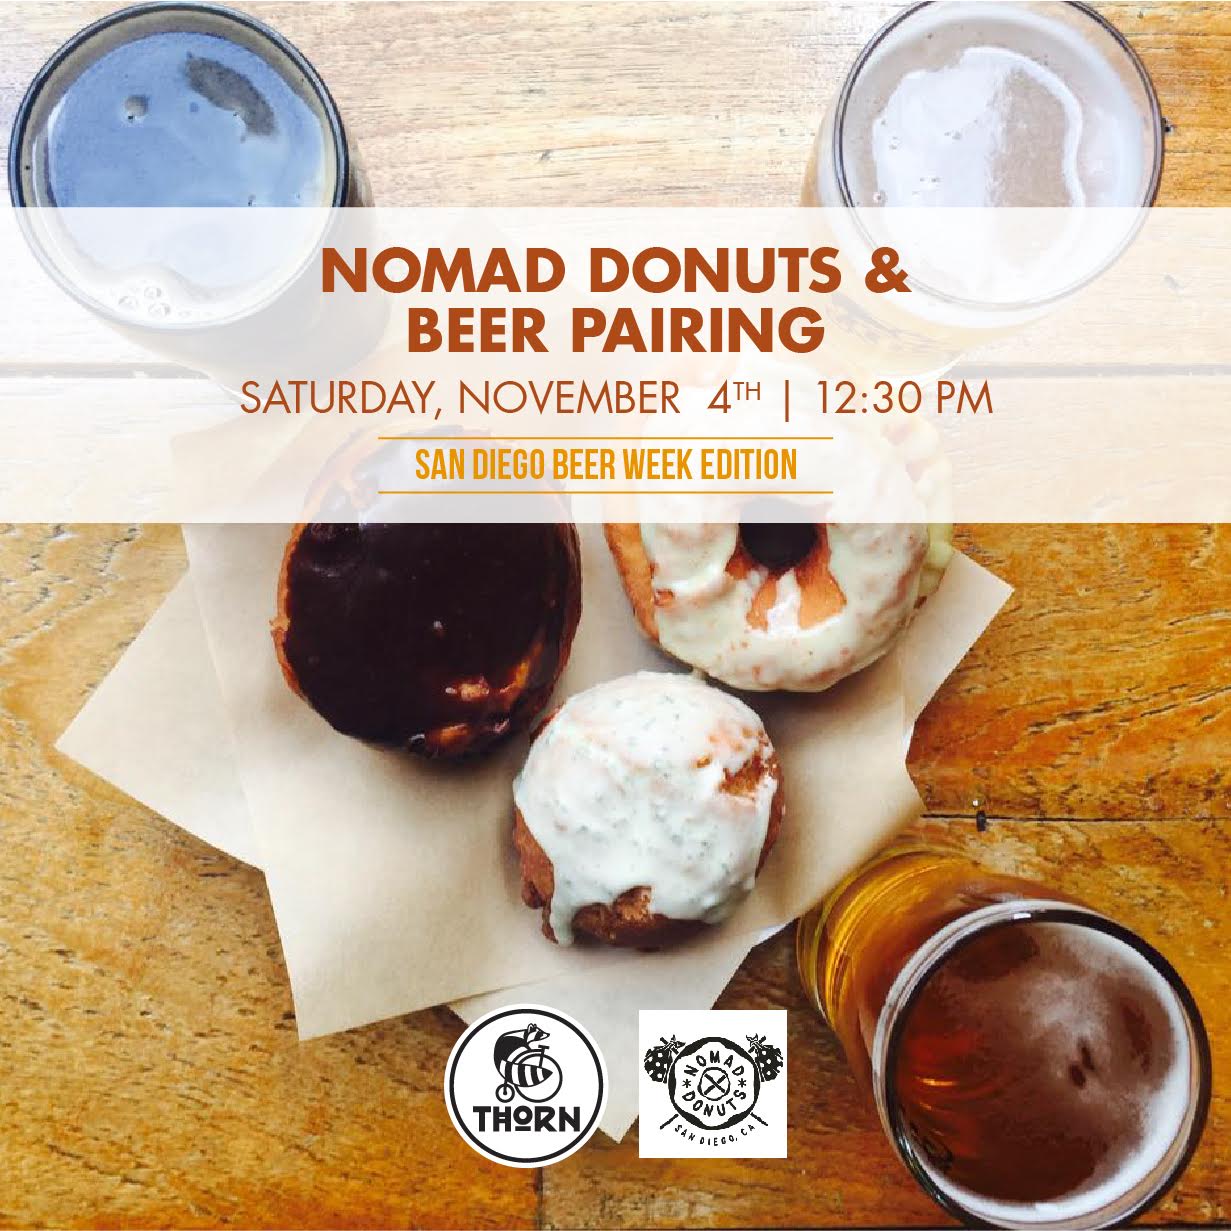 Nomand Donut & Beer Pairing at Thorn St Brewing in North Park SD